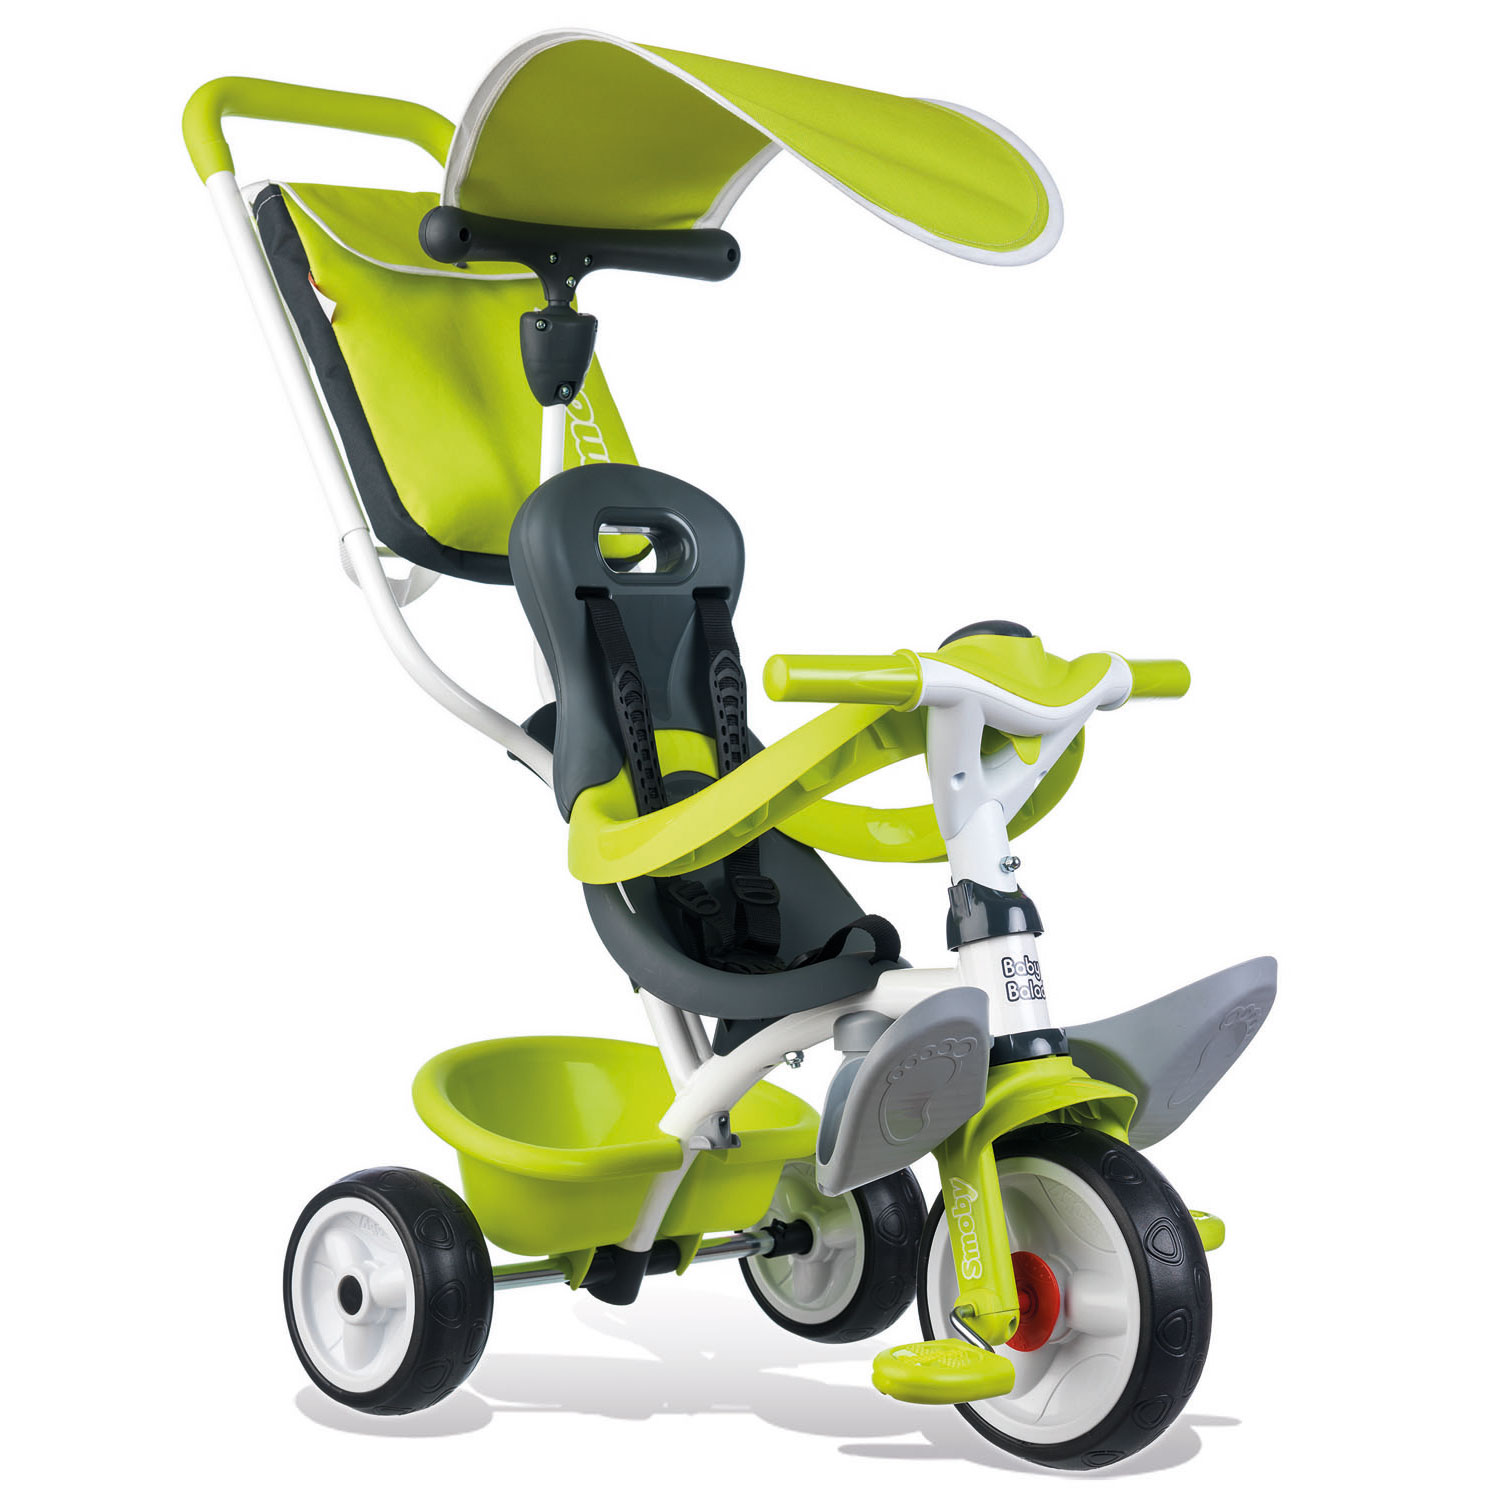 Smoby Baby Balade Tricycle Green